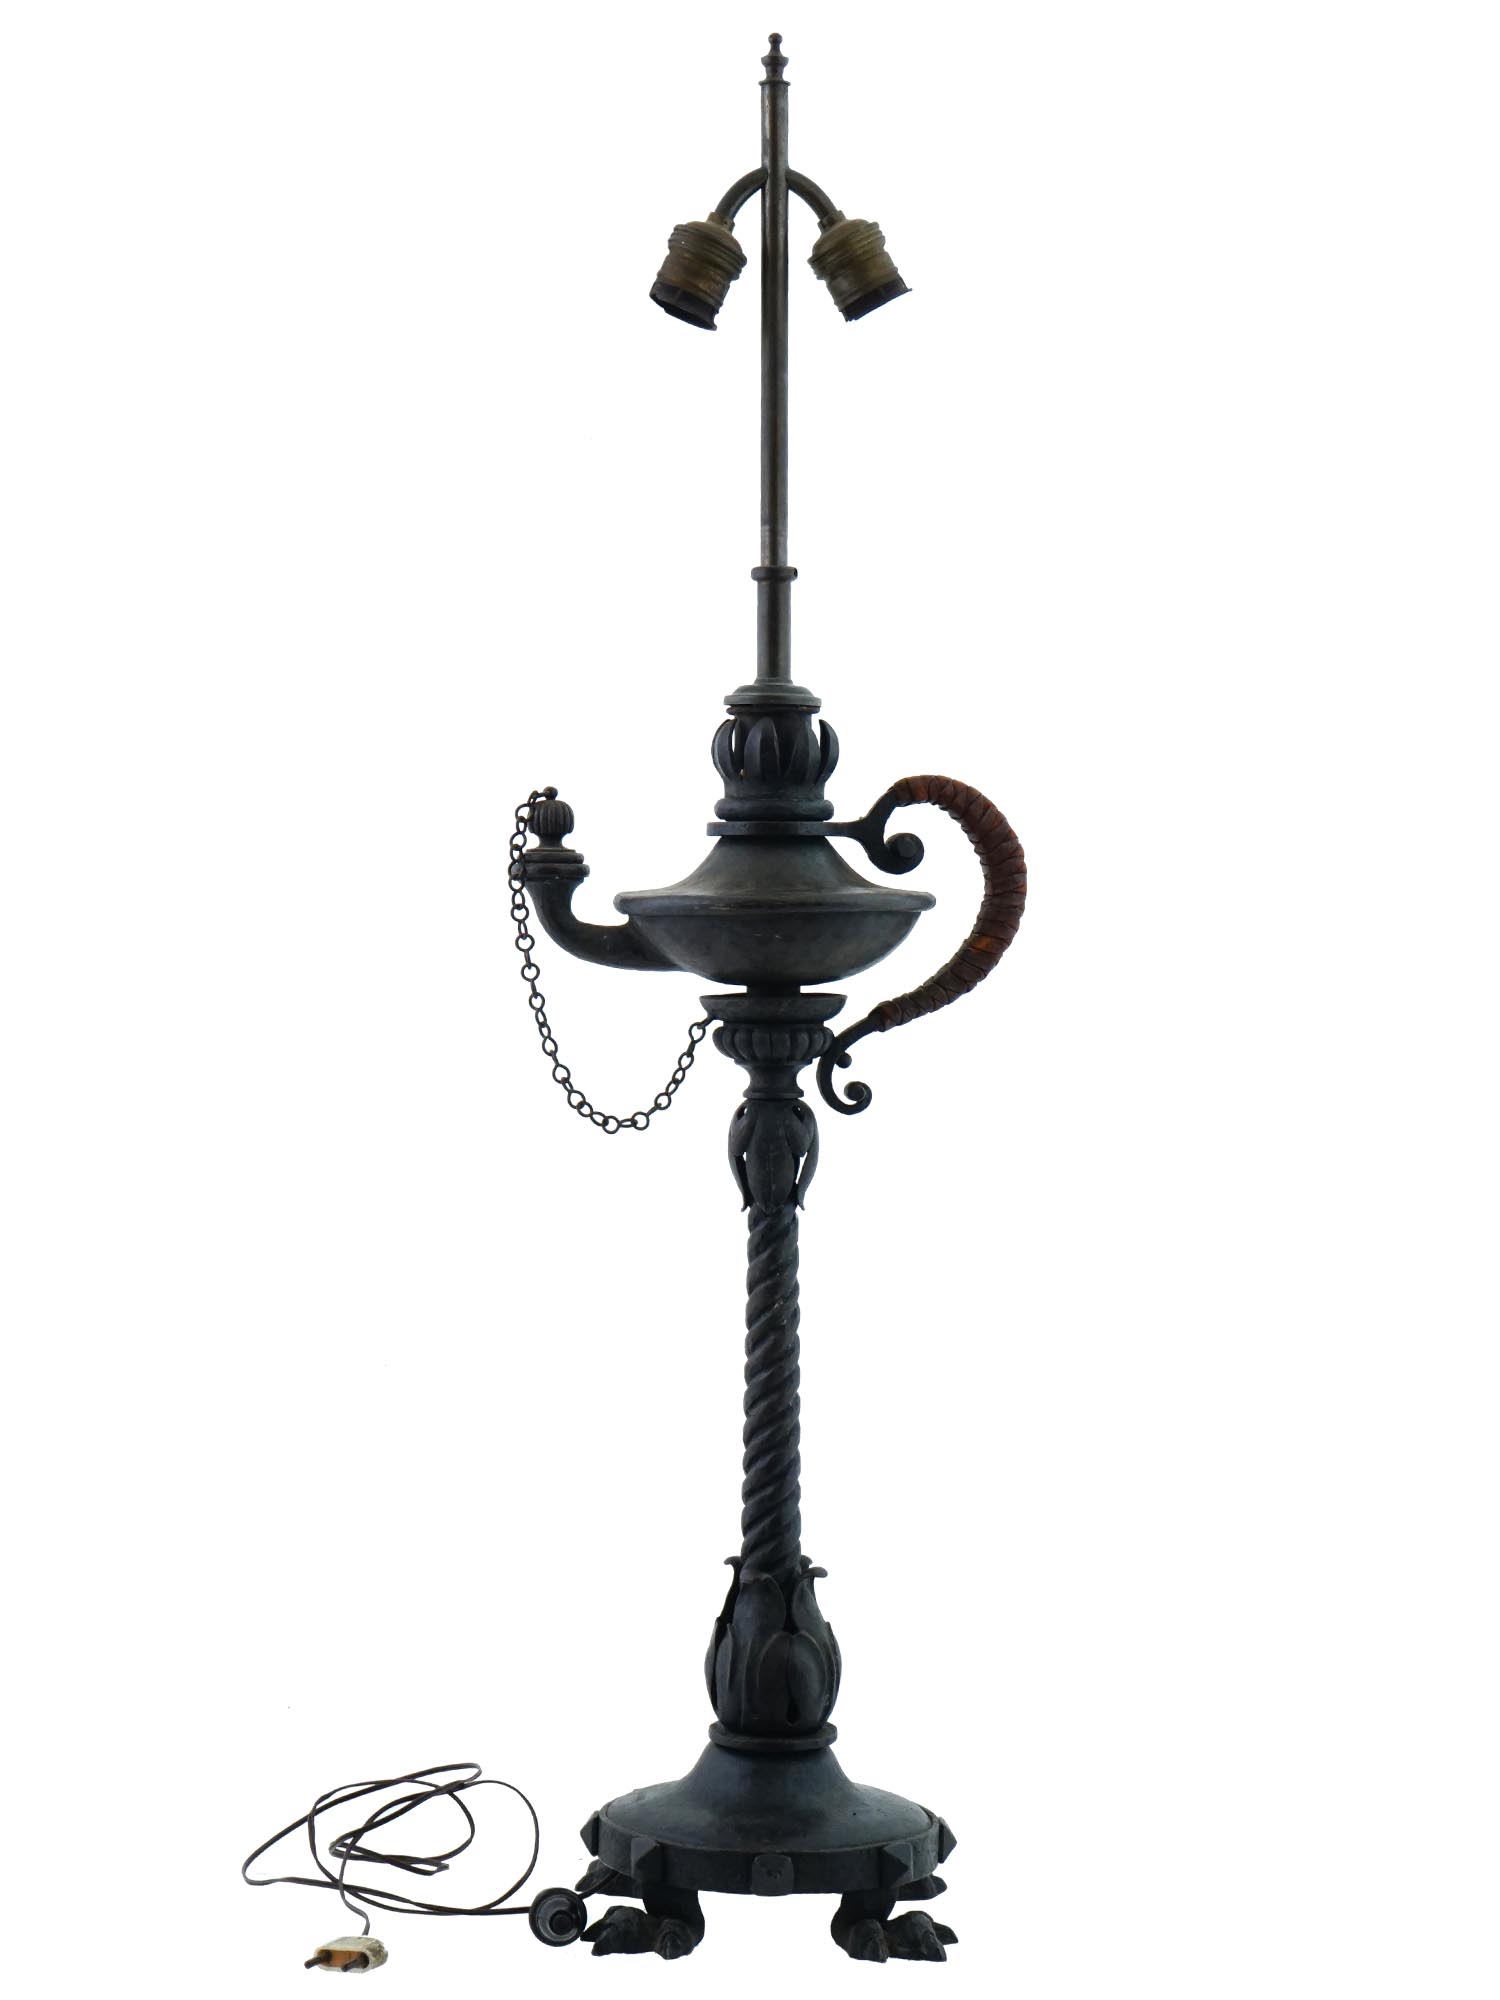 ANTIQUE WROUGHT IRON TABLE LAMP BY JOSE THENEE PIC-0